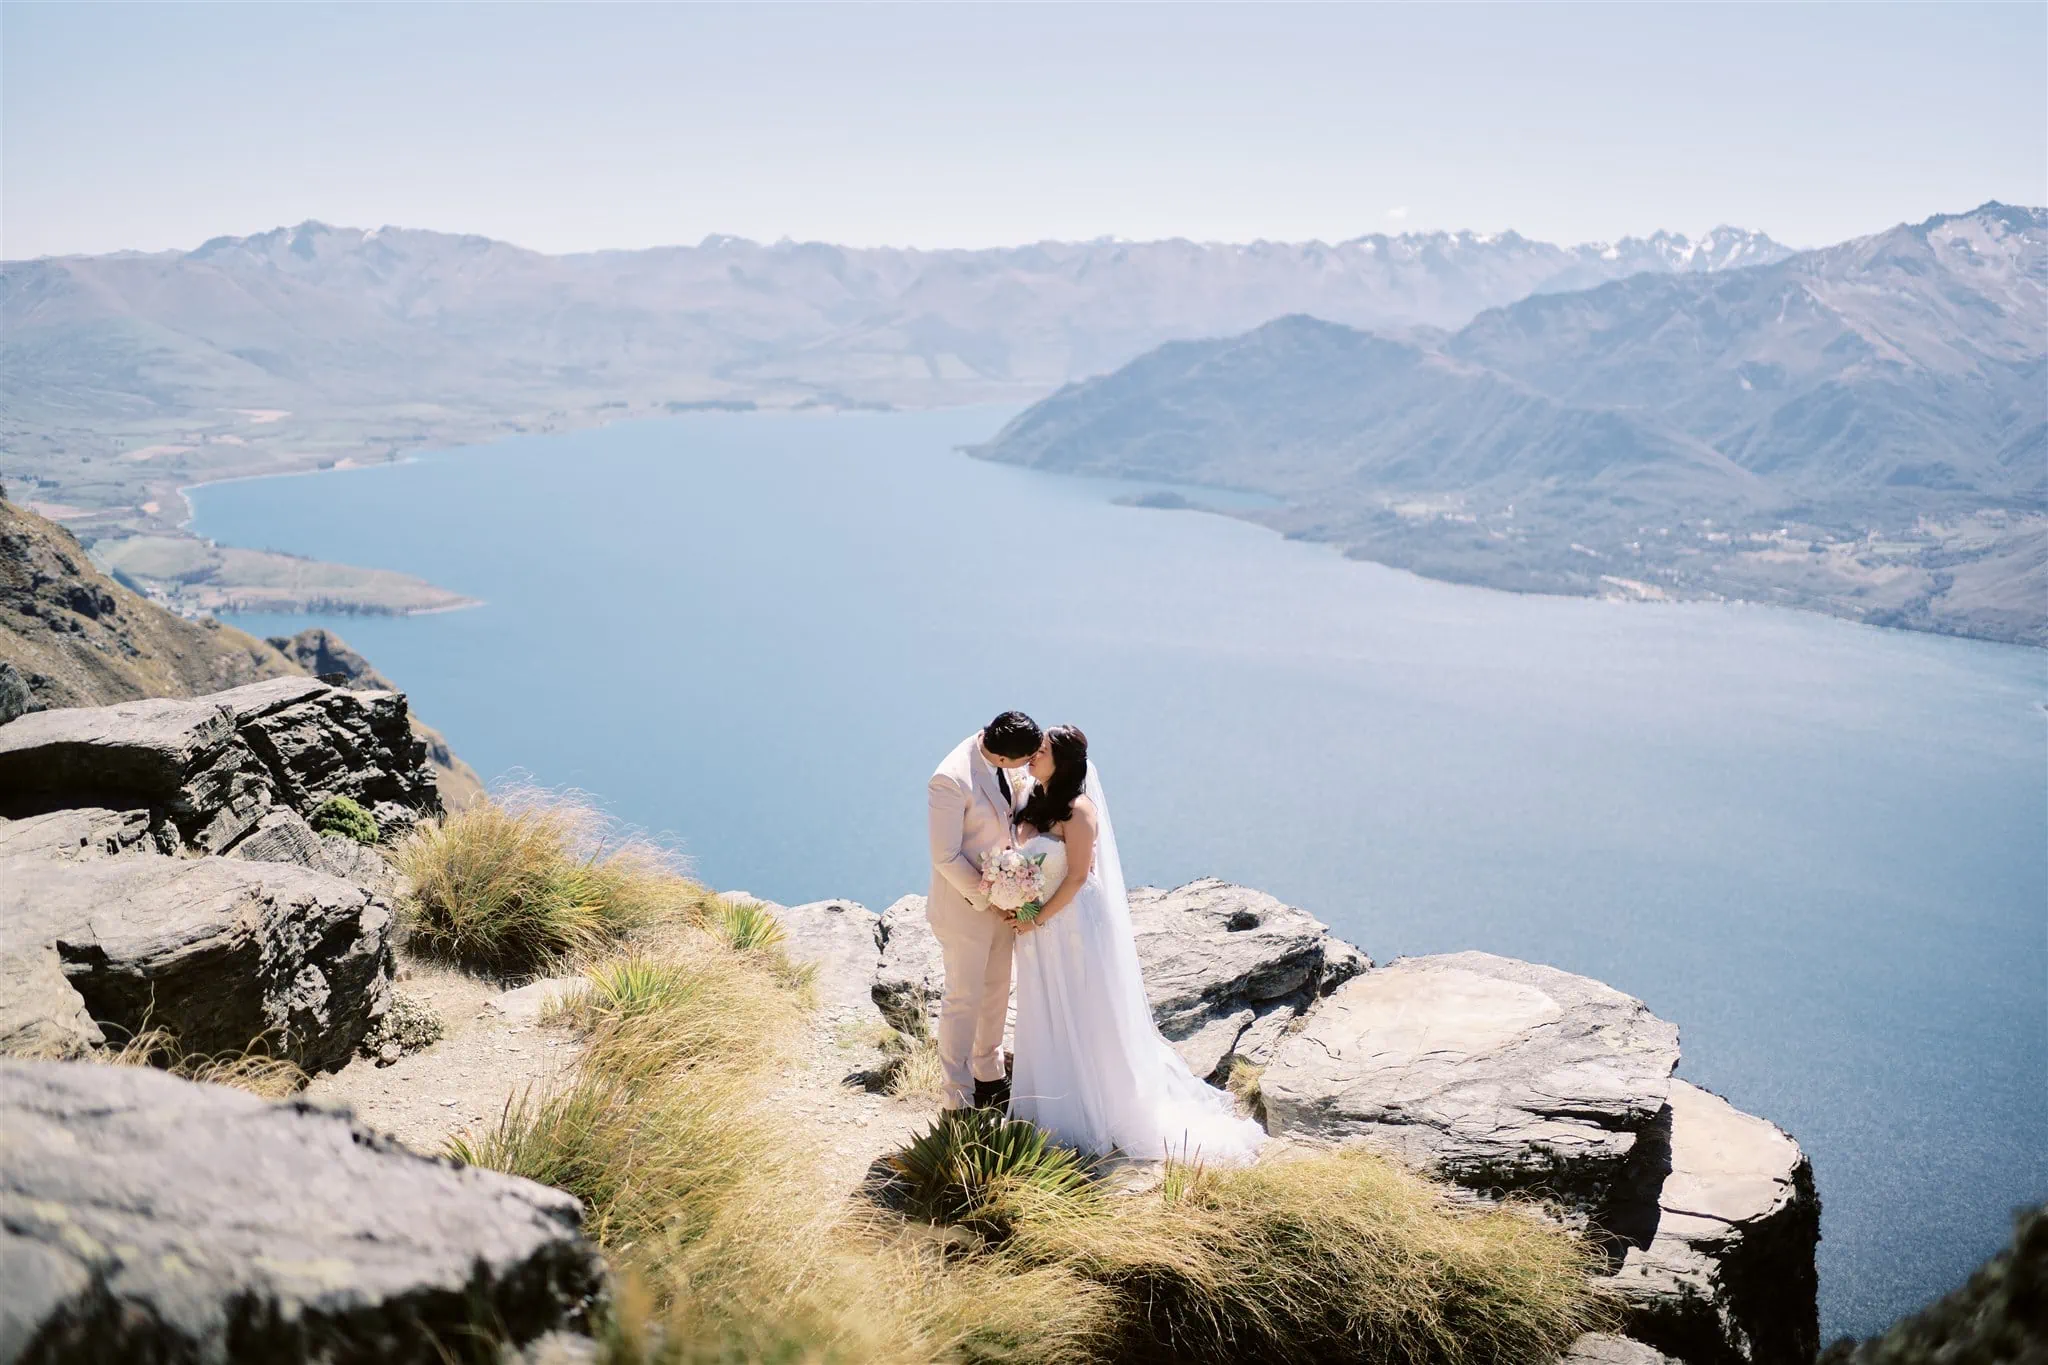 Queenstown Elopement Heli Wedding Photographer クイーンズタウン結婚式 | A Queenstown elopement of a man and woman kissing on a cliff overlooking a lake.